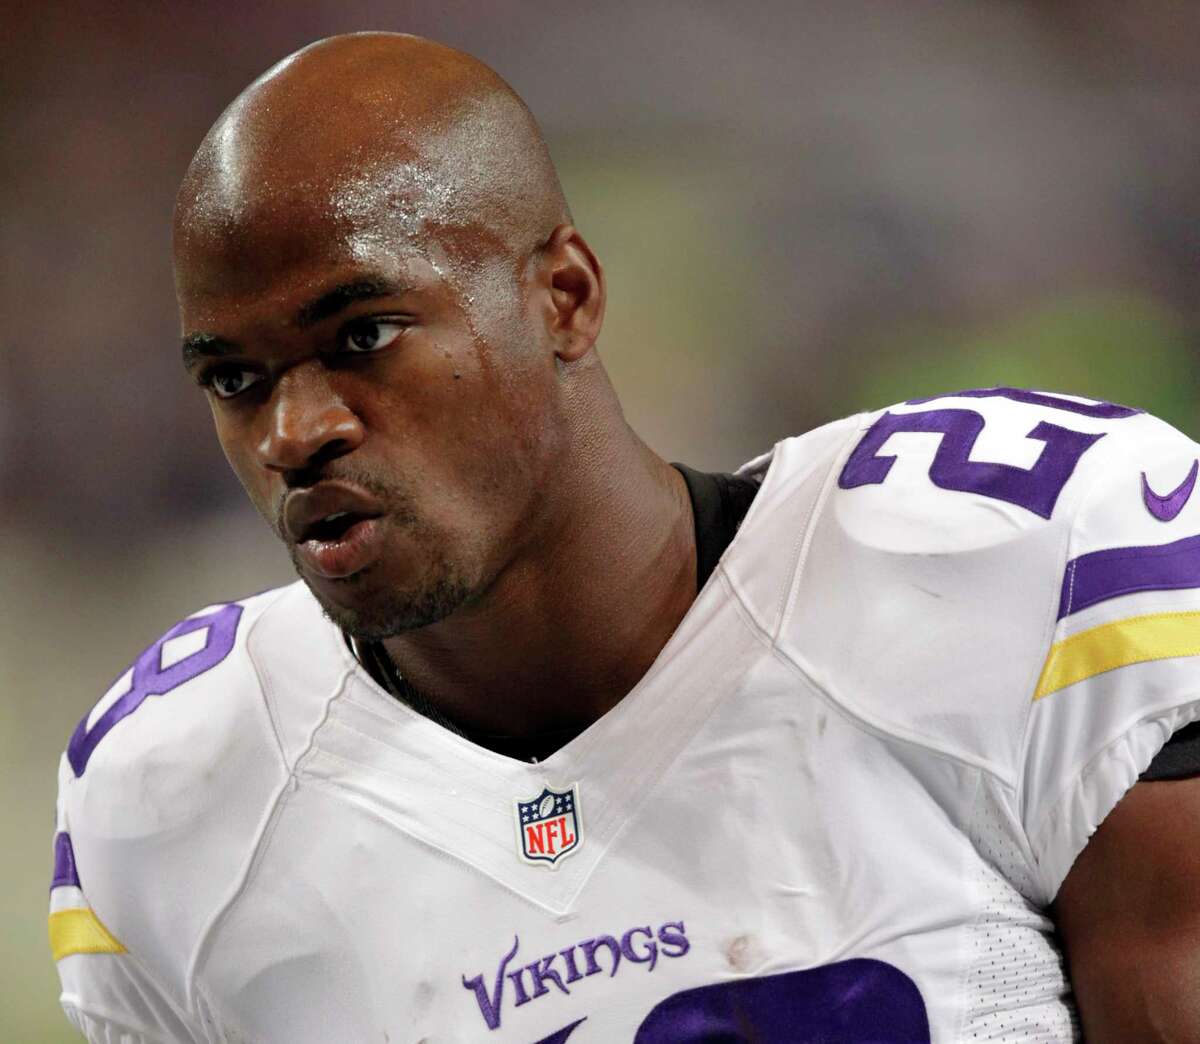 The Vikings reinstated Adrian Peterson on Monday.